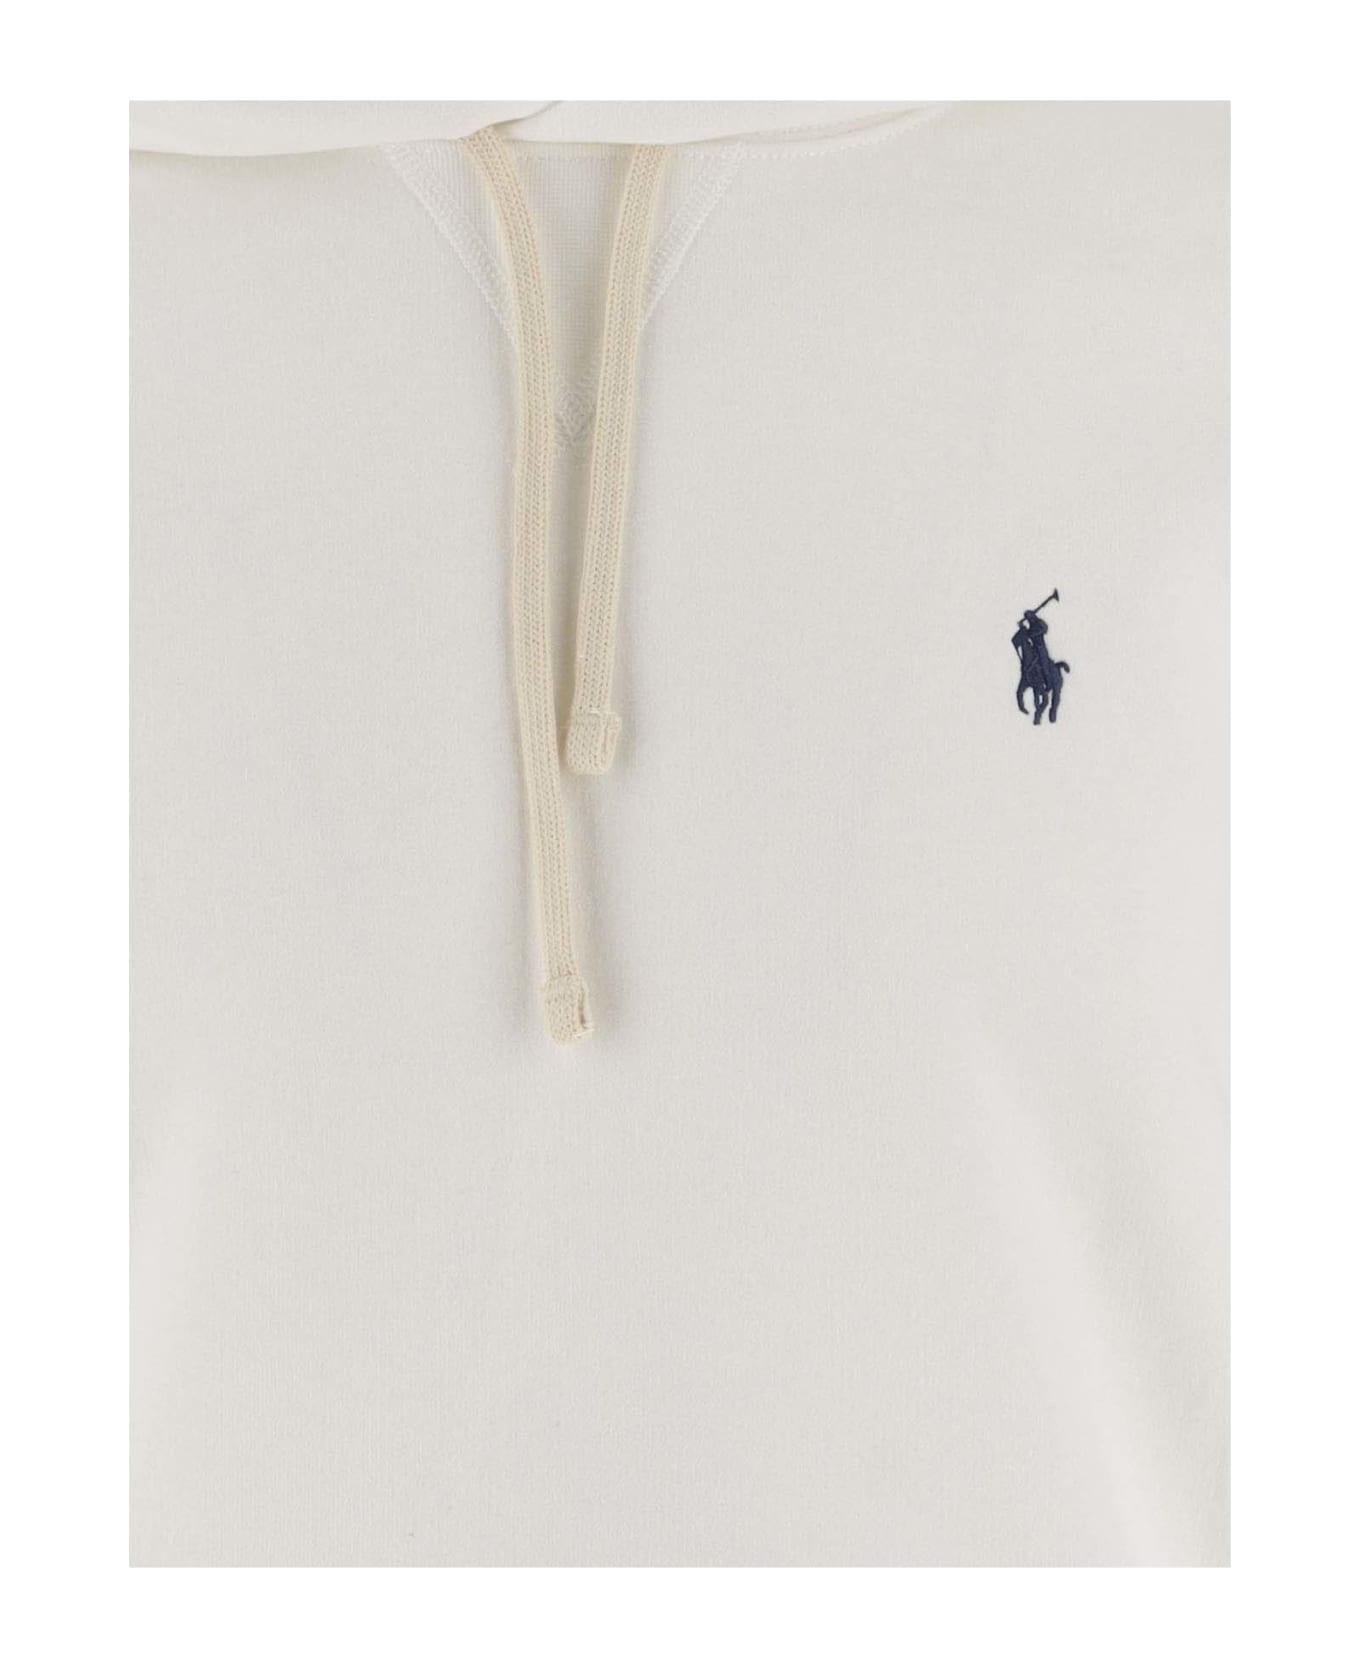 Polo Ralph Lauren Cotton Blend Hoodie With Logo - White